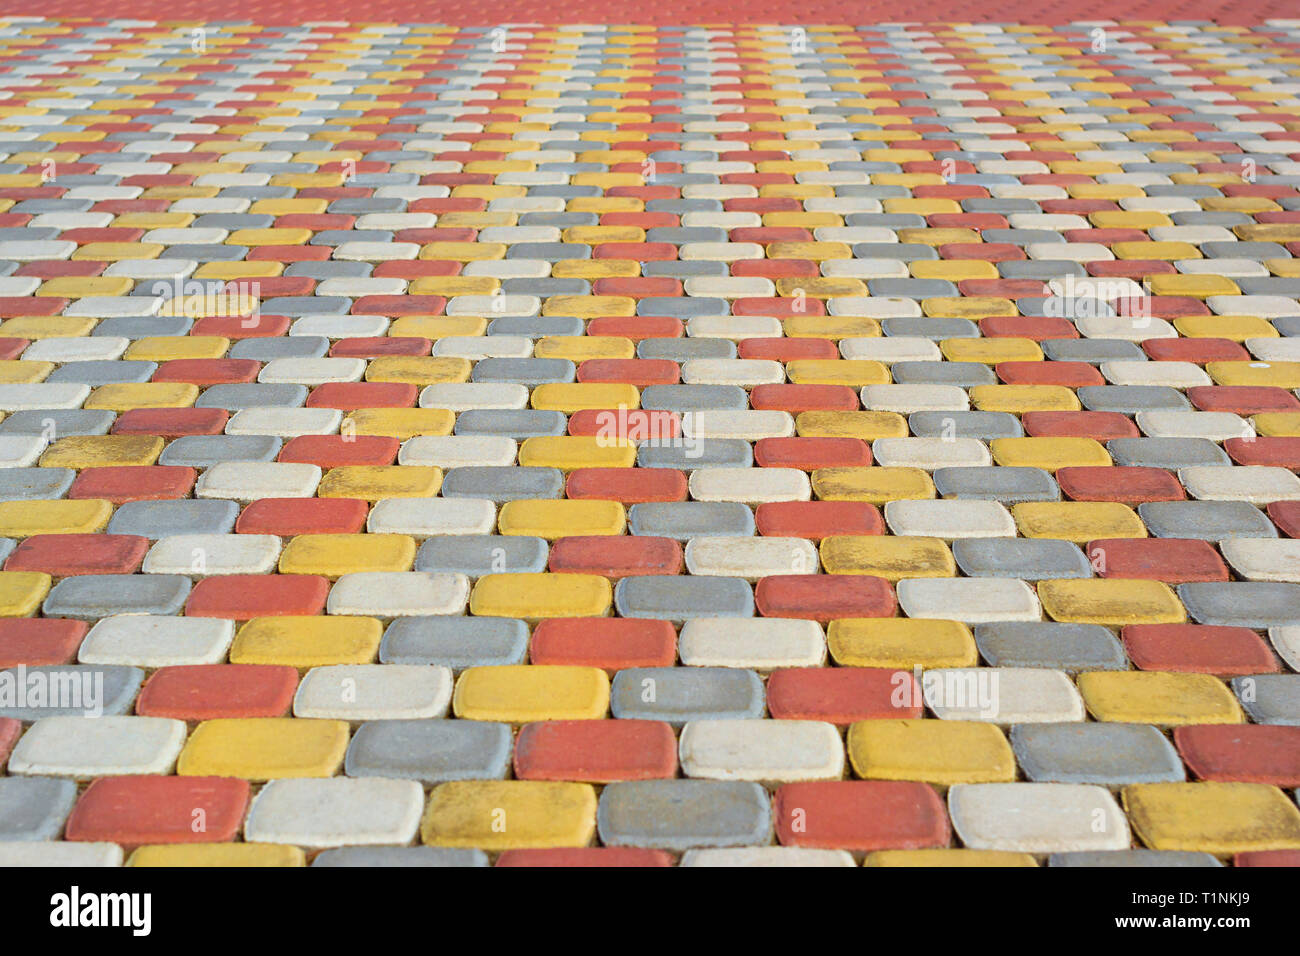 Paving slabs for pedestrian areas. Texture of paving slabs of different colors for the improvement of yards and footpaths Stock Photo